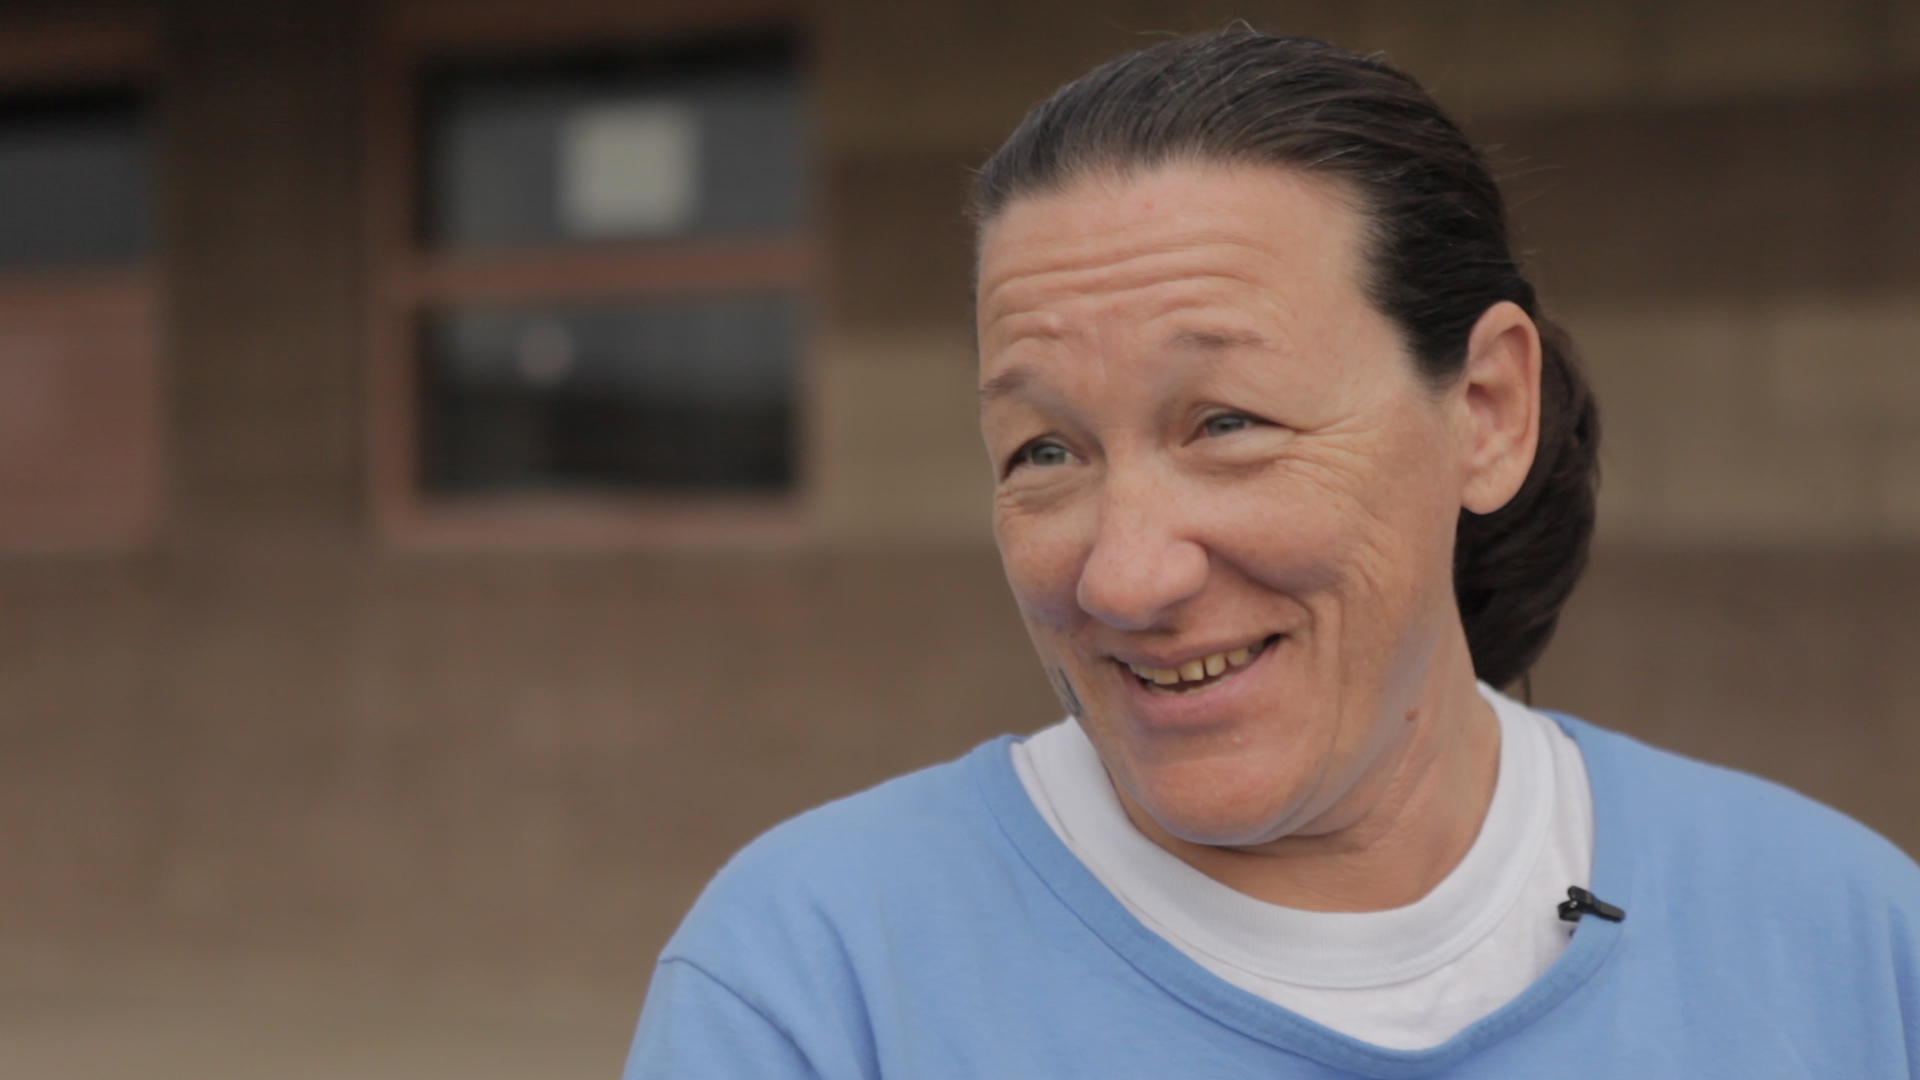 Alissa found God's purpose for her life after she tried to kill herself in prison.